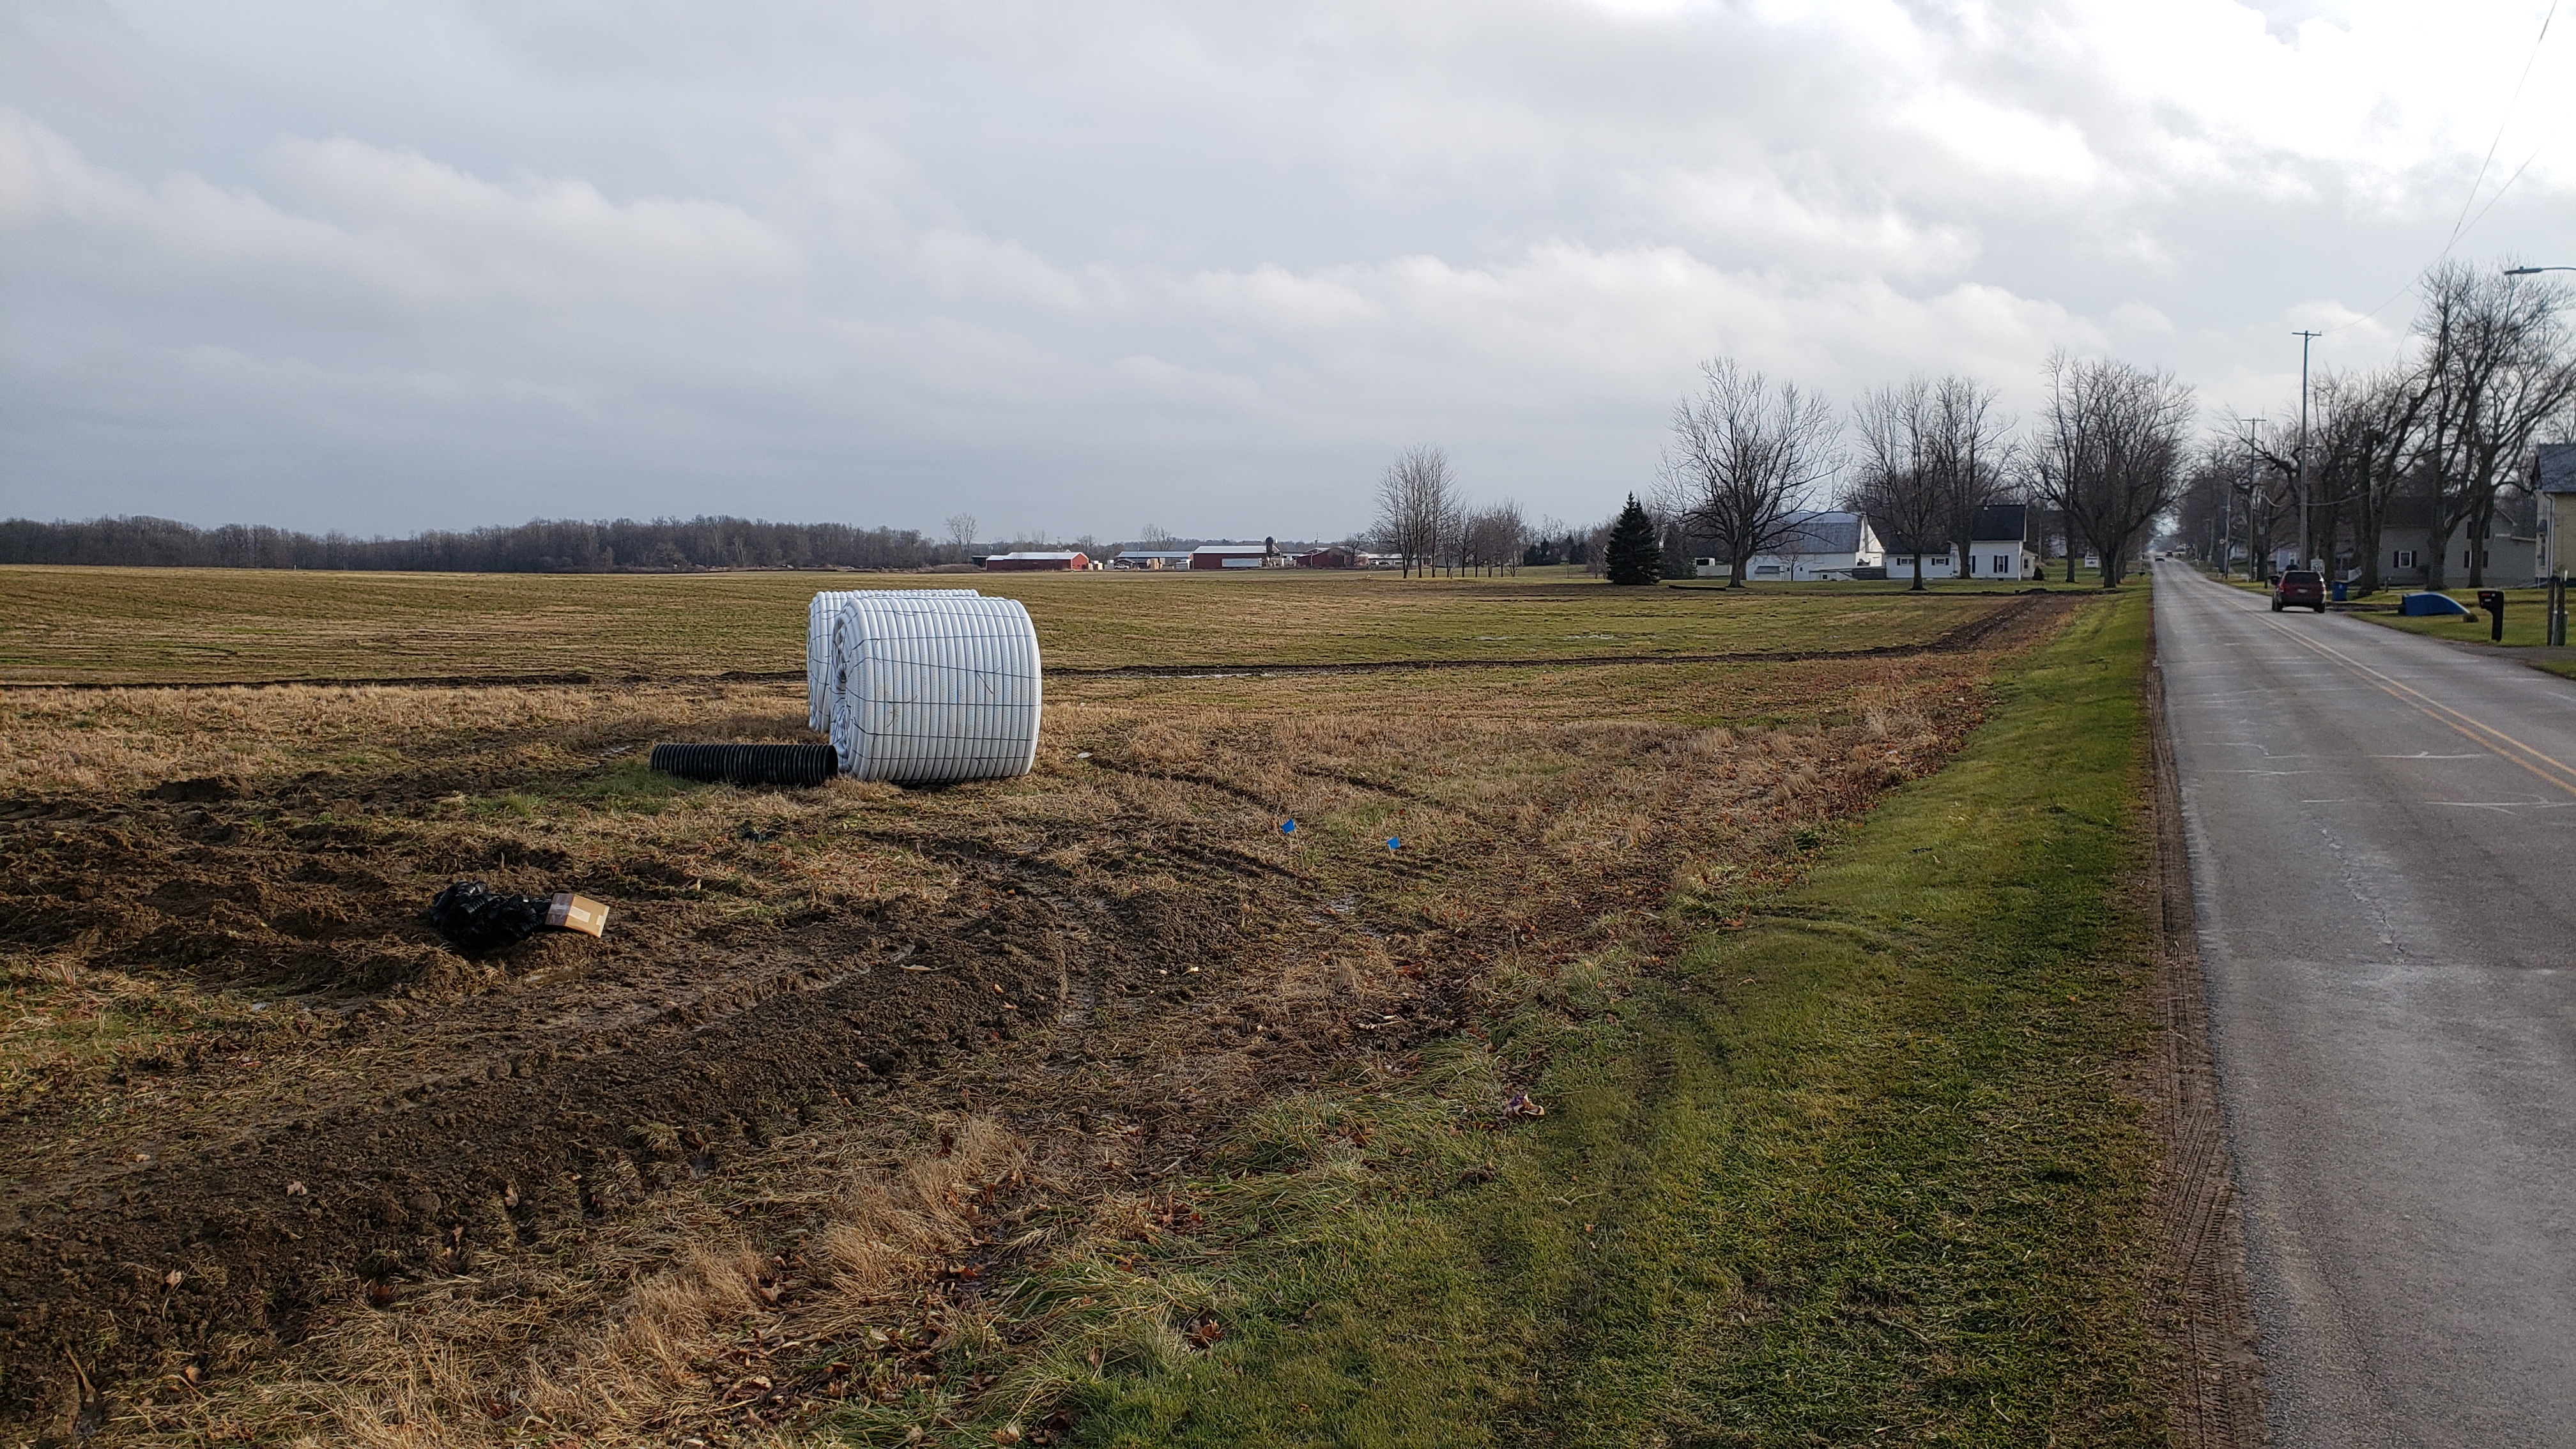 Installing a drainage system in a field.